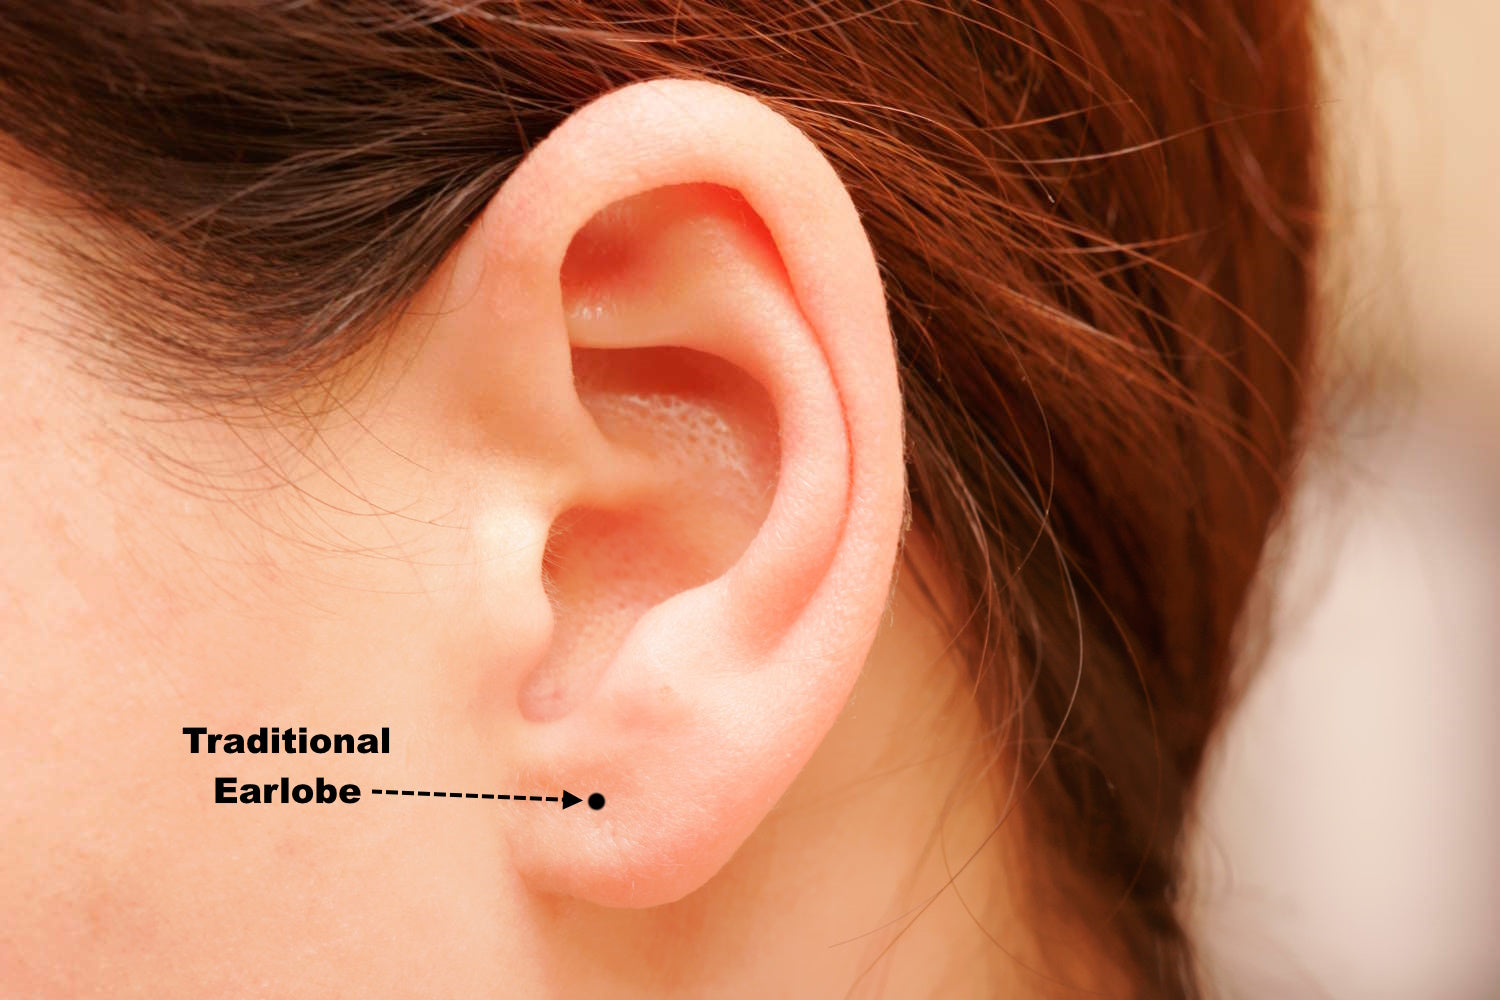 A diagram showing the location of a traditional earlobe piercing on an ear.